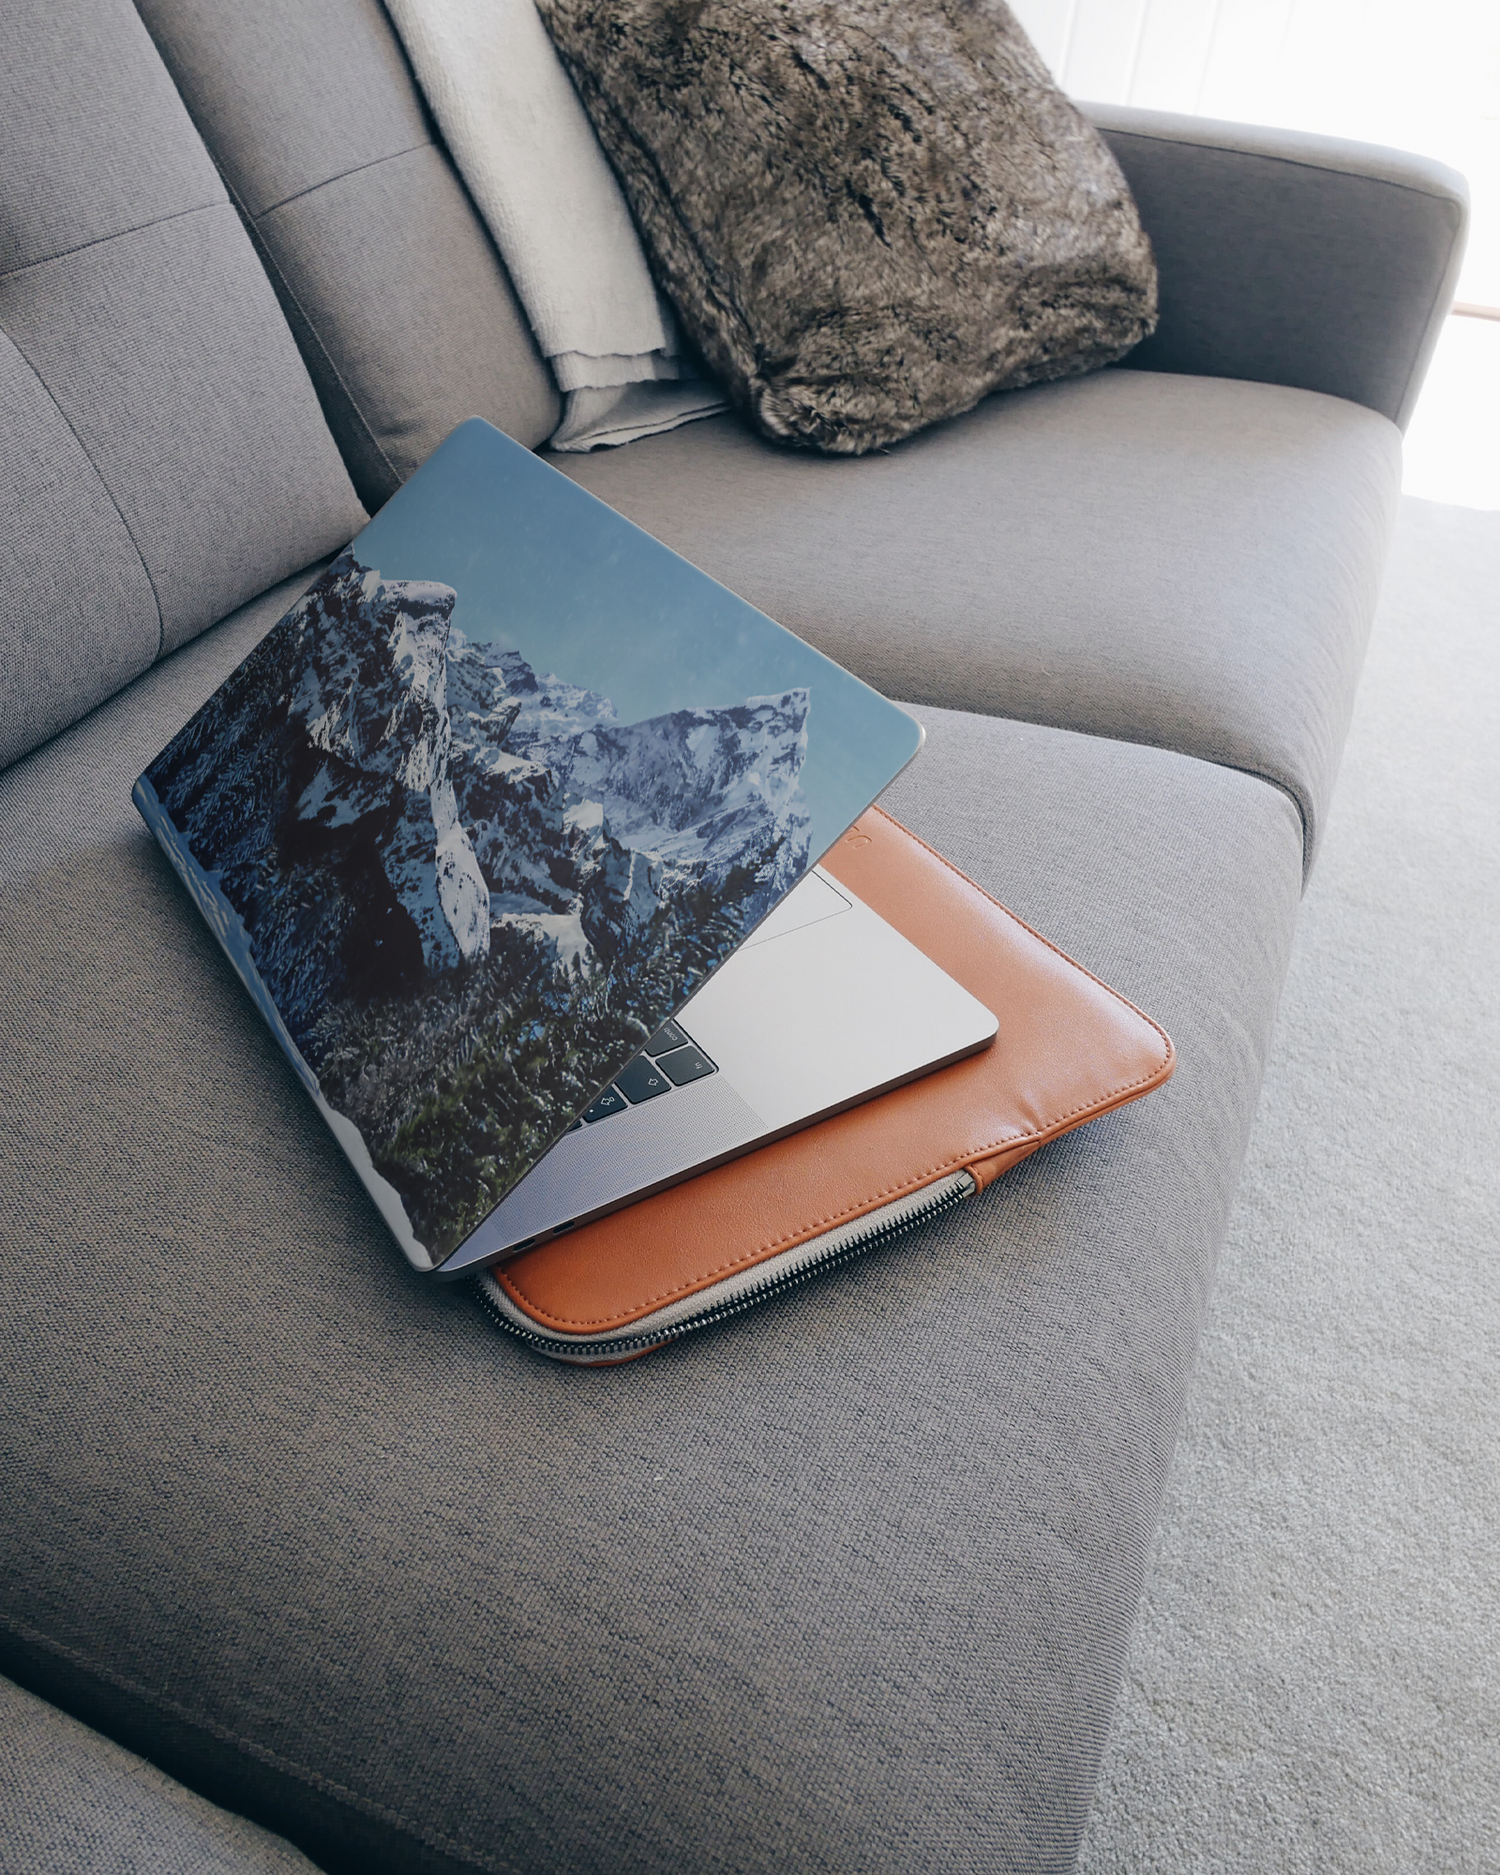 Winter Landscape Laptop Skin for 15 inch Apple MacBooks on a couch